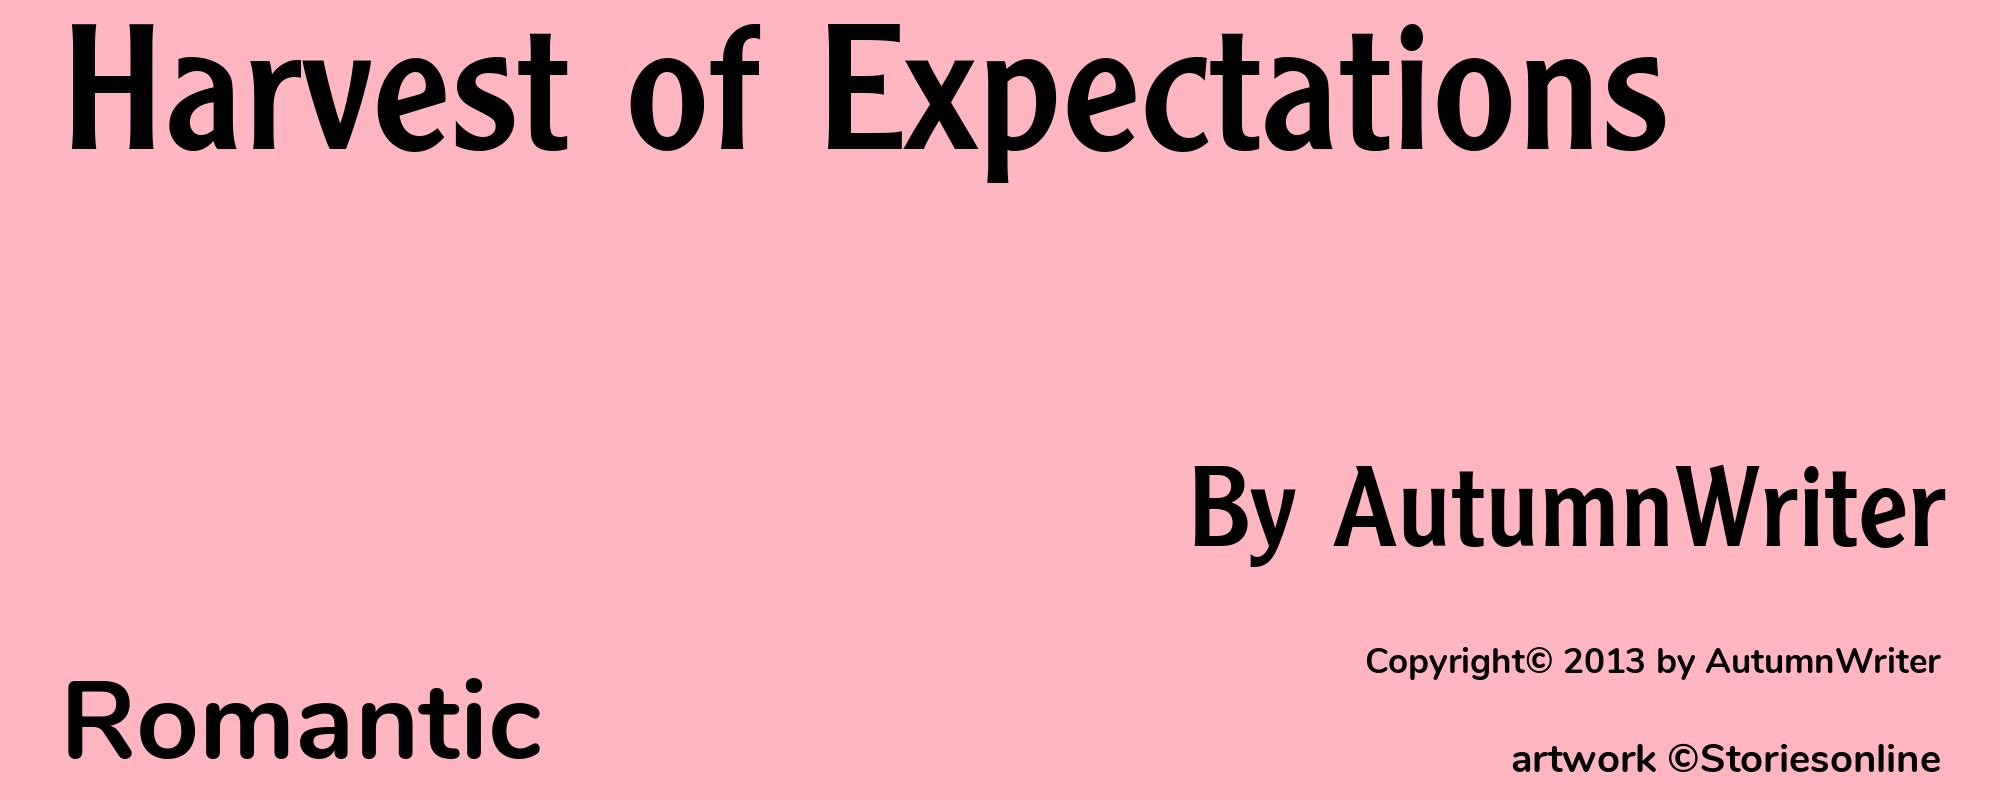 Harvest of Expectations - Cover